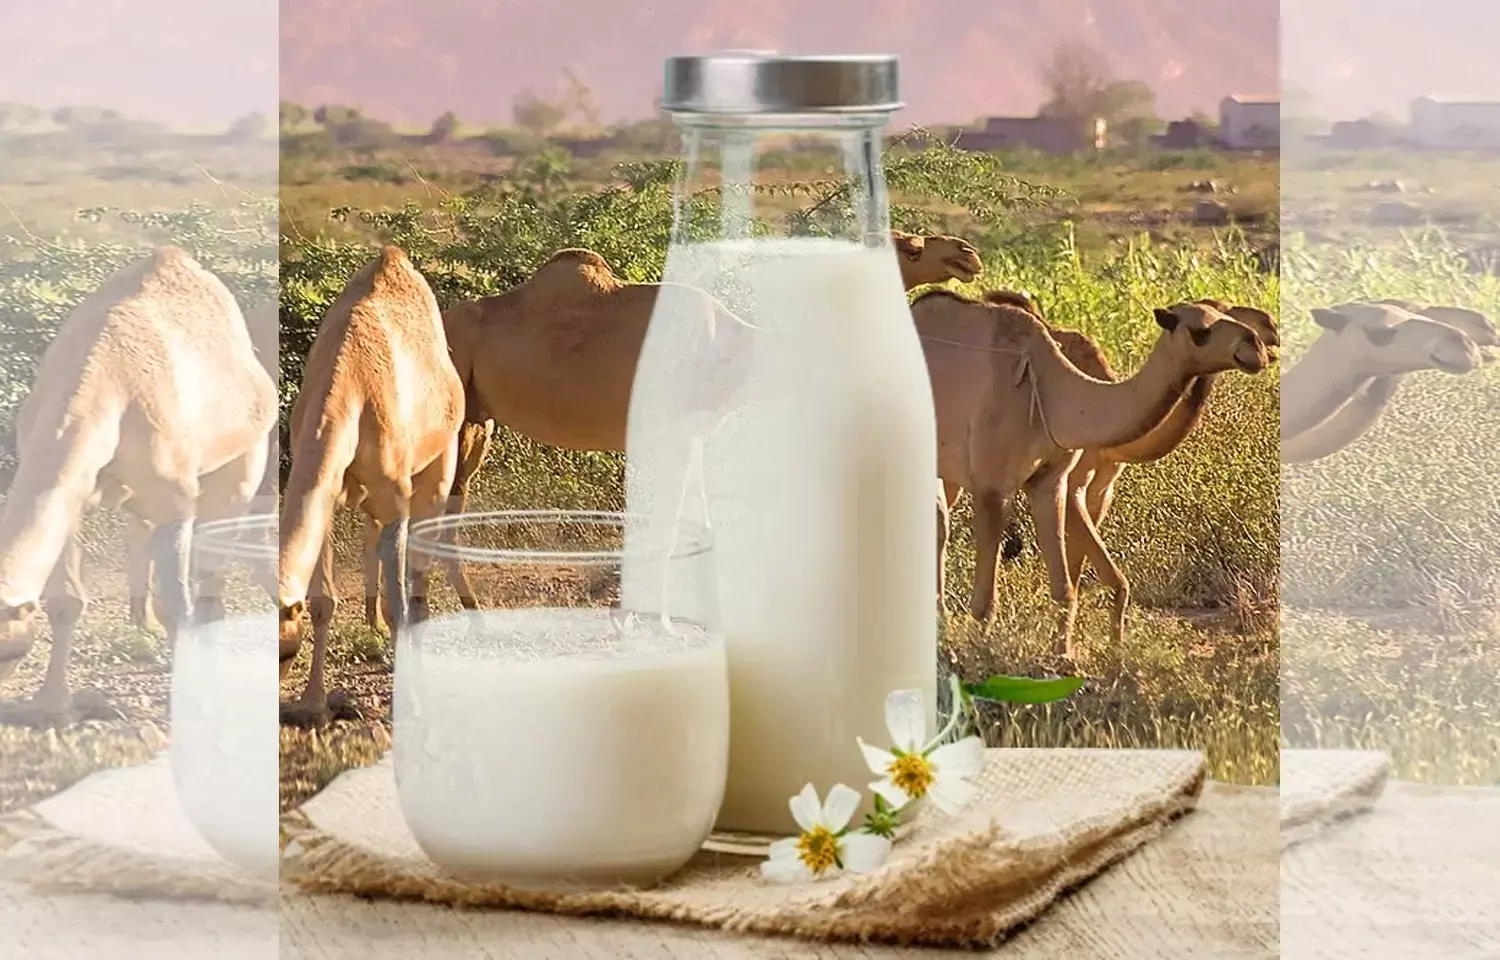 Camel milk may lower blood sugar and help in management of  diabetes: Study